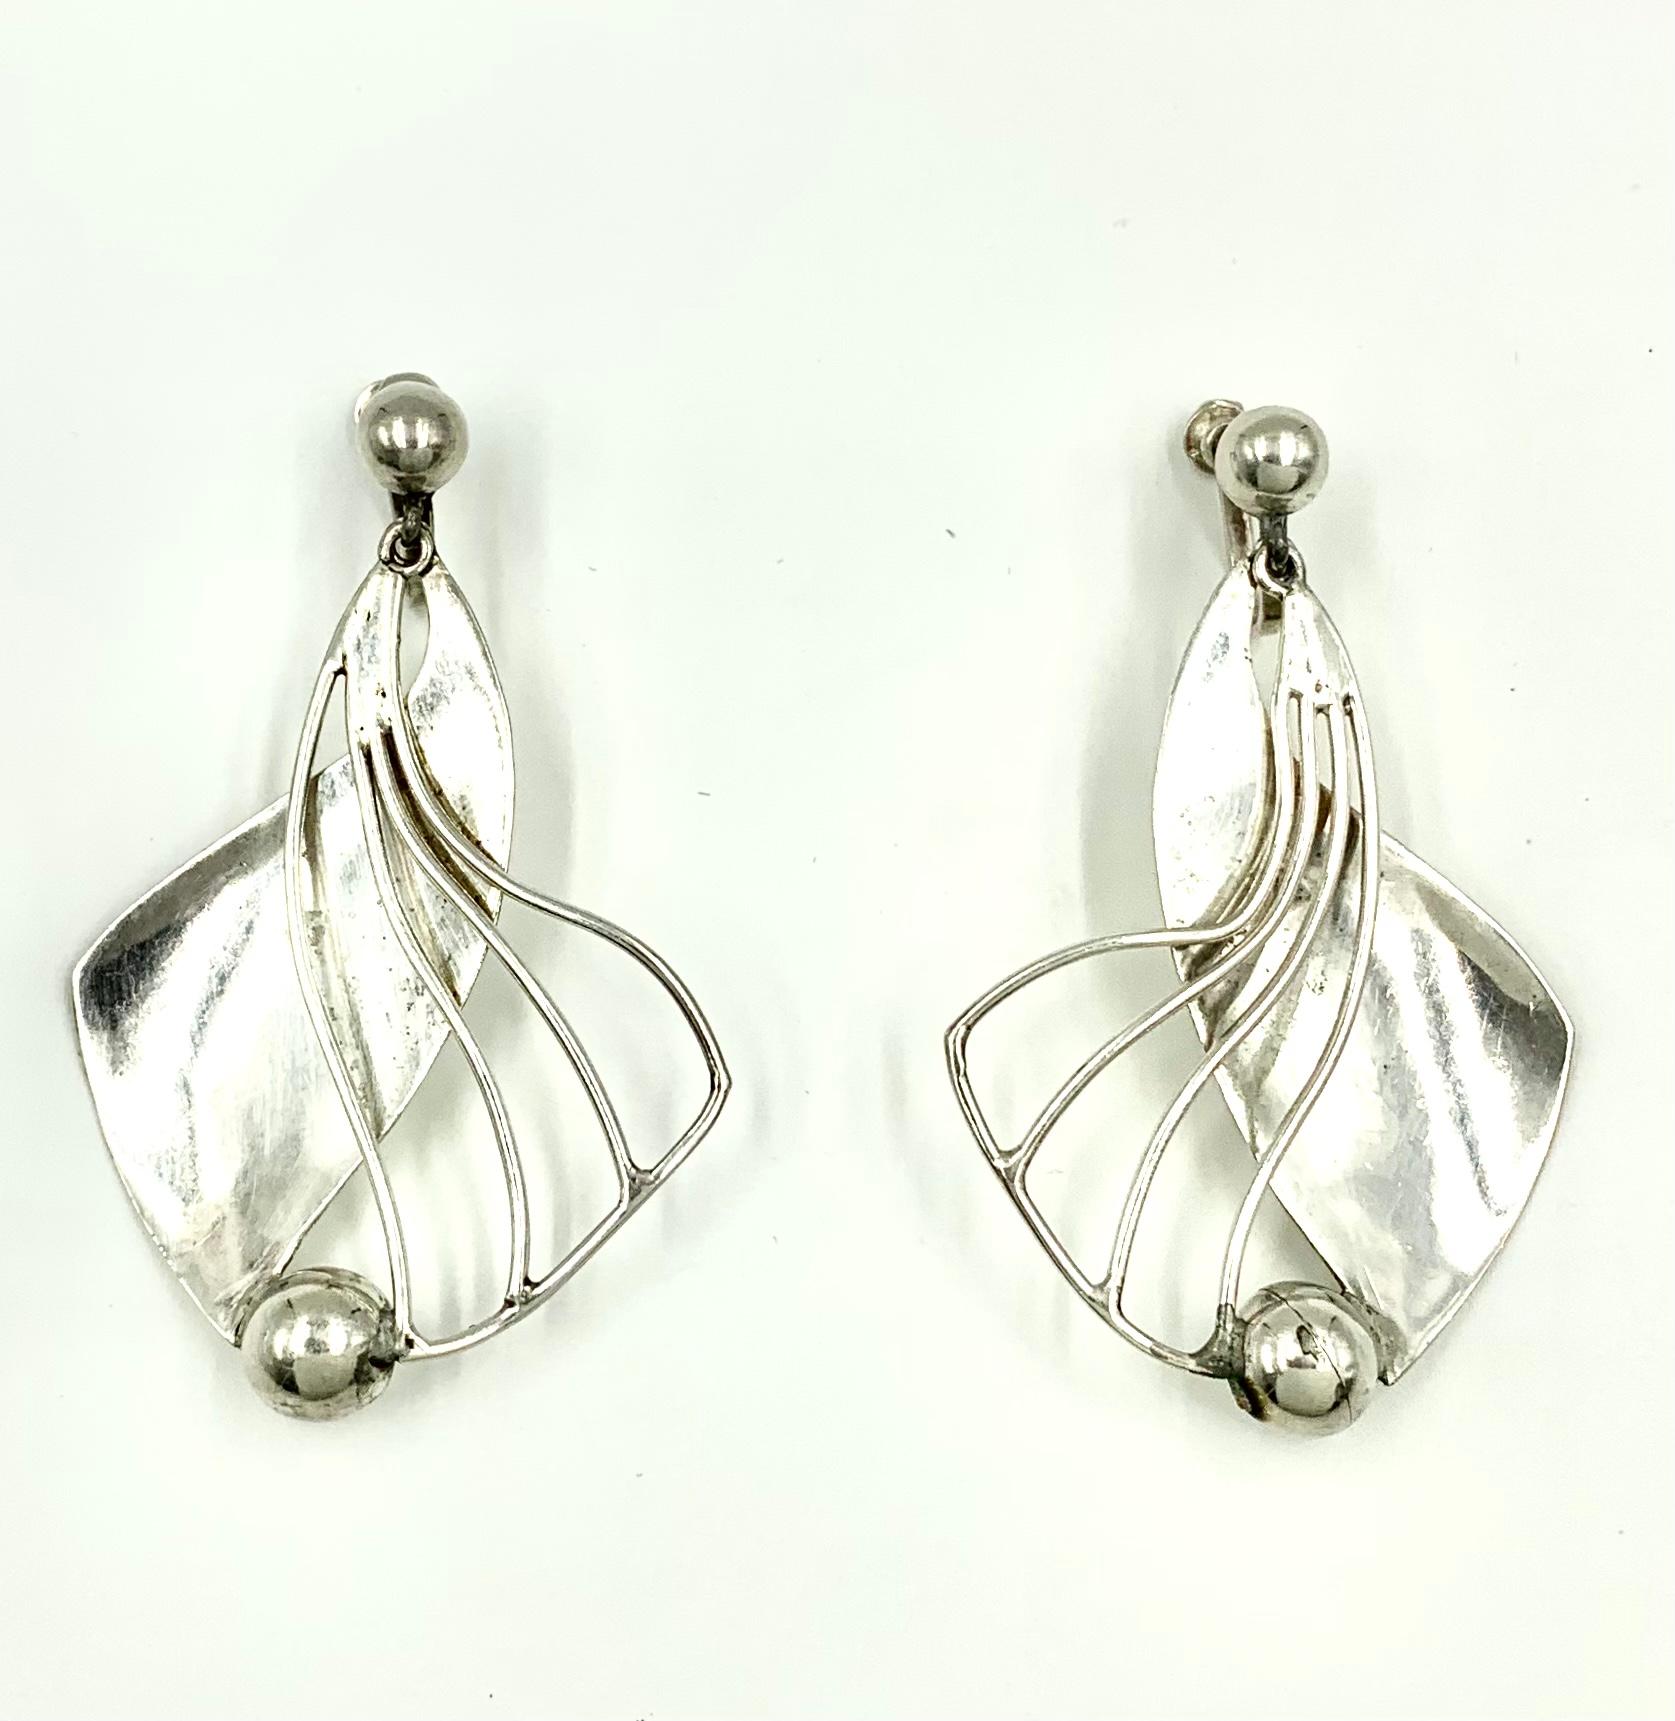 These beautiful, large William Spratling earrings have the ephemeral feel of butterfly wings.
William Spratling, Architecture professor and lecturer, has been called the Father of Mexican Modernist Silver Design. He earned a degree in architecture